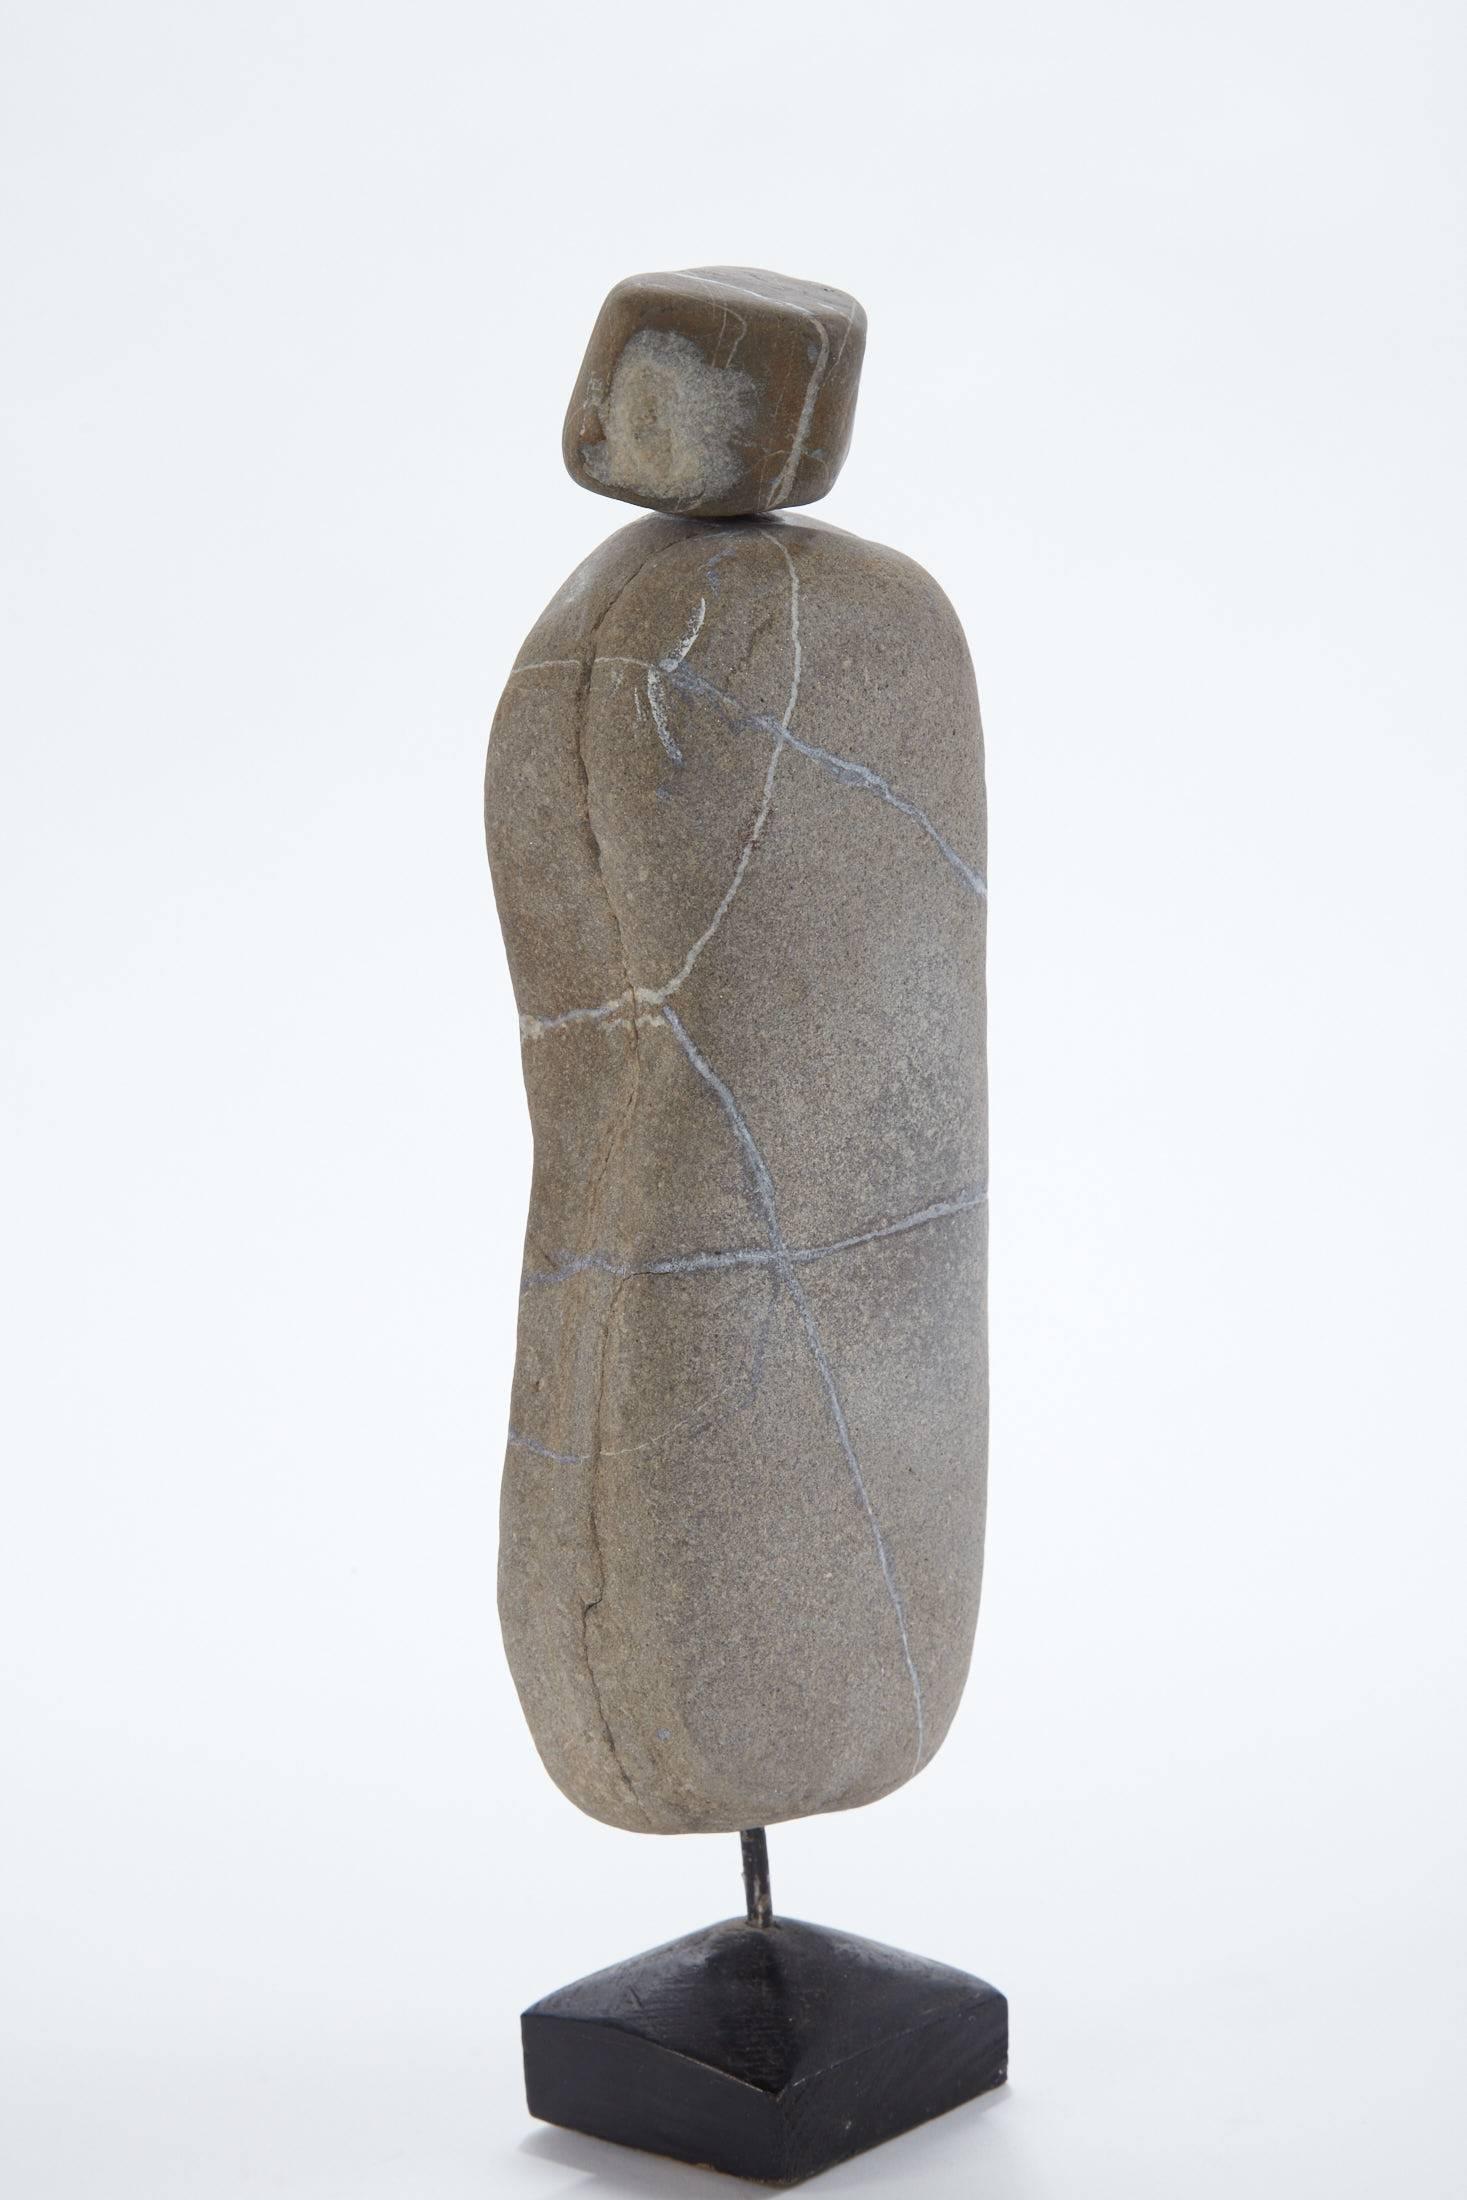 20th century stone figural sculpture from Germany.